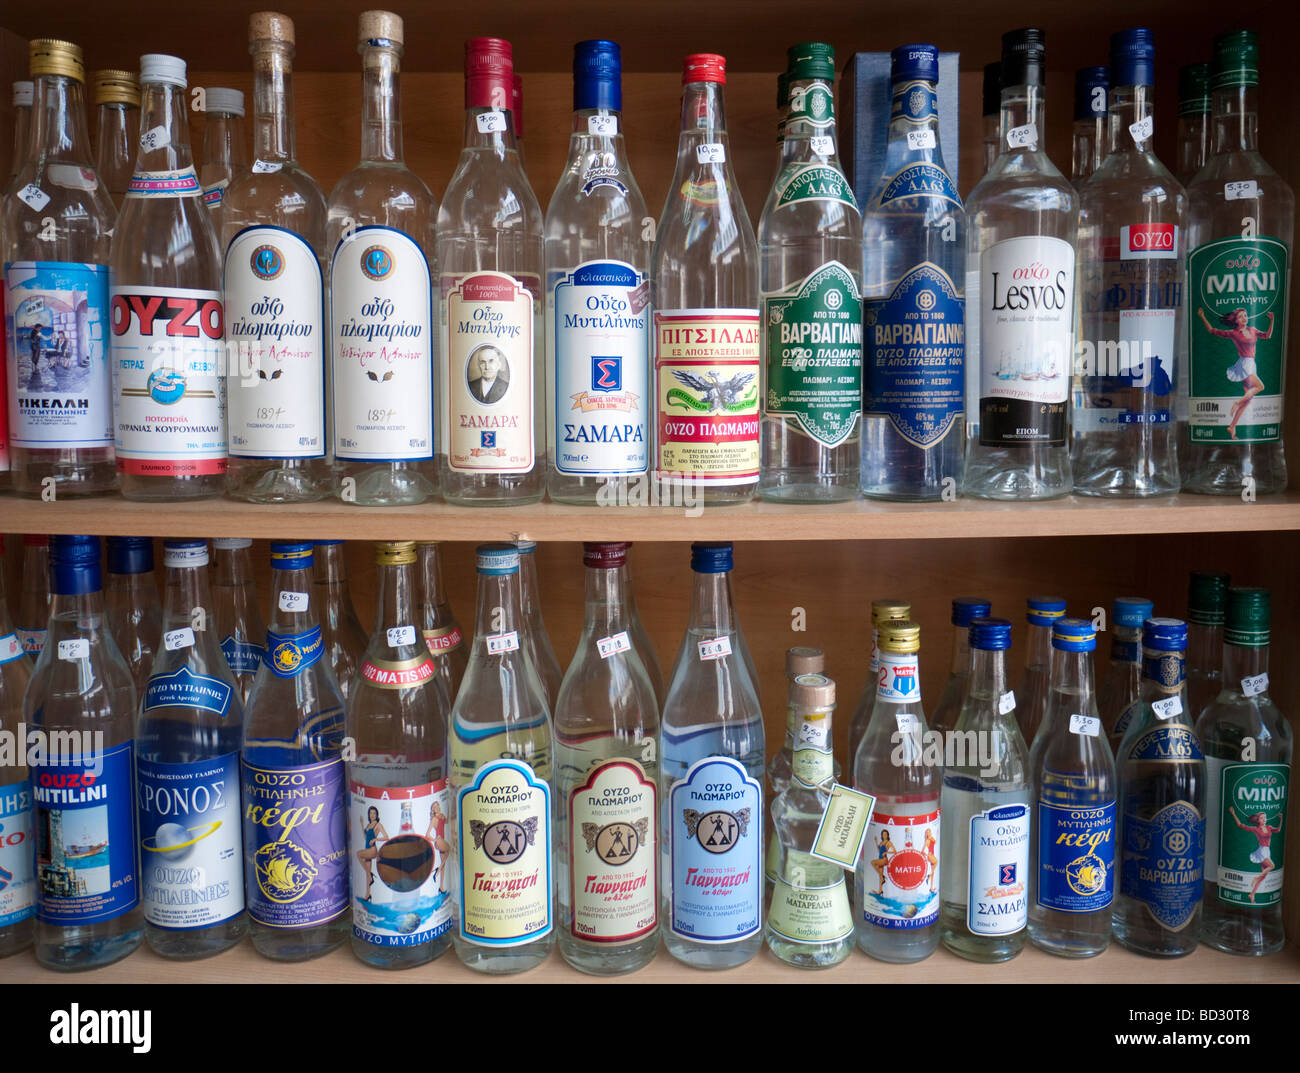 Detail of  local Ouzo bottles for sale in shop on Lesvos Island in Greece Stock Photo